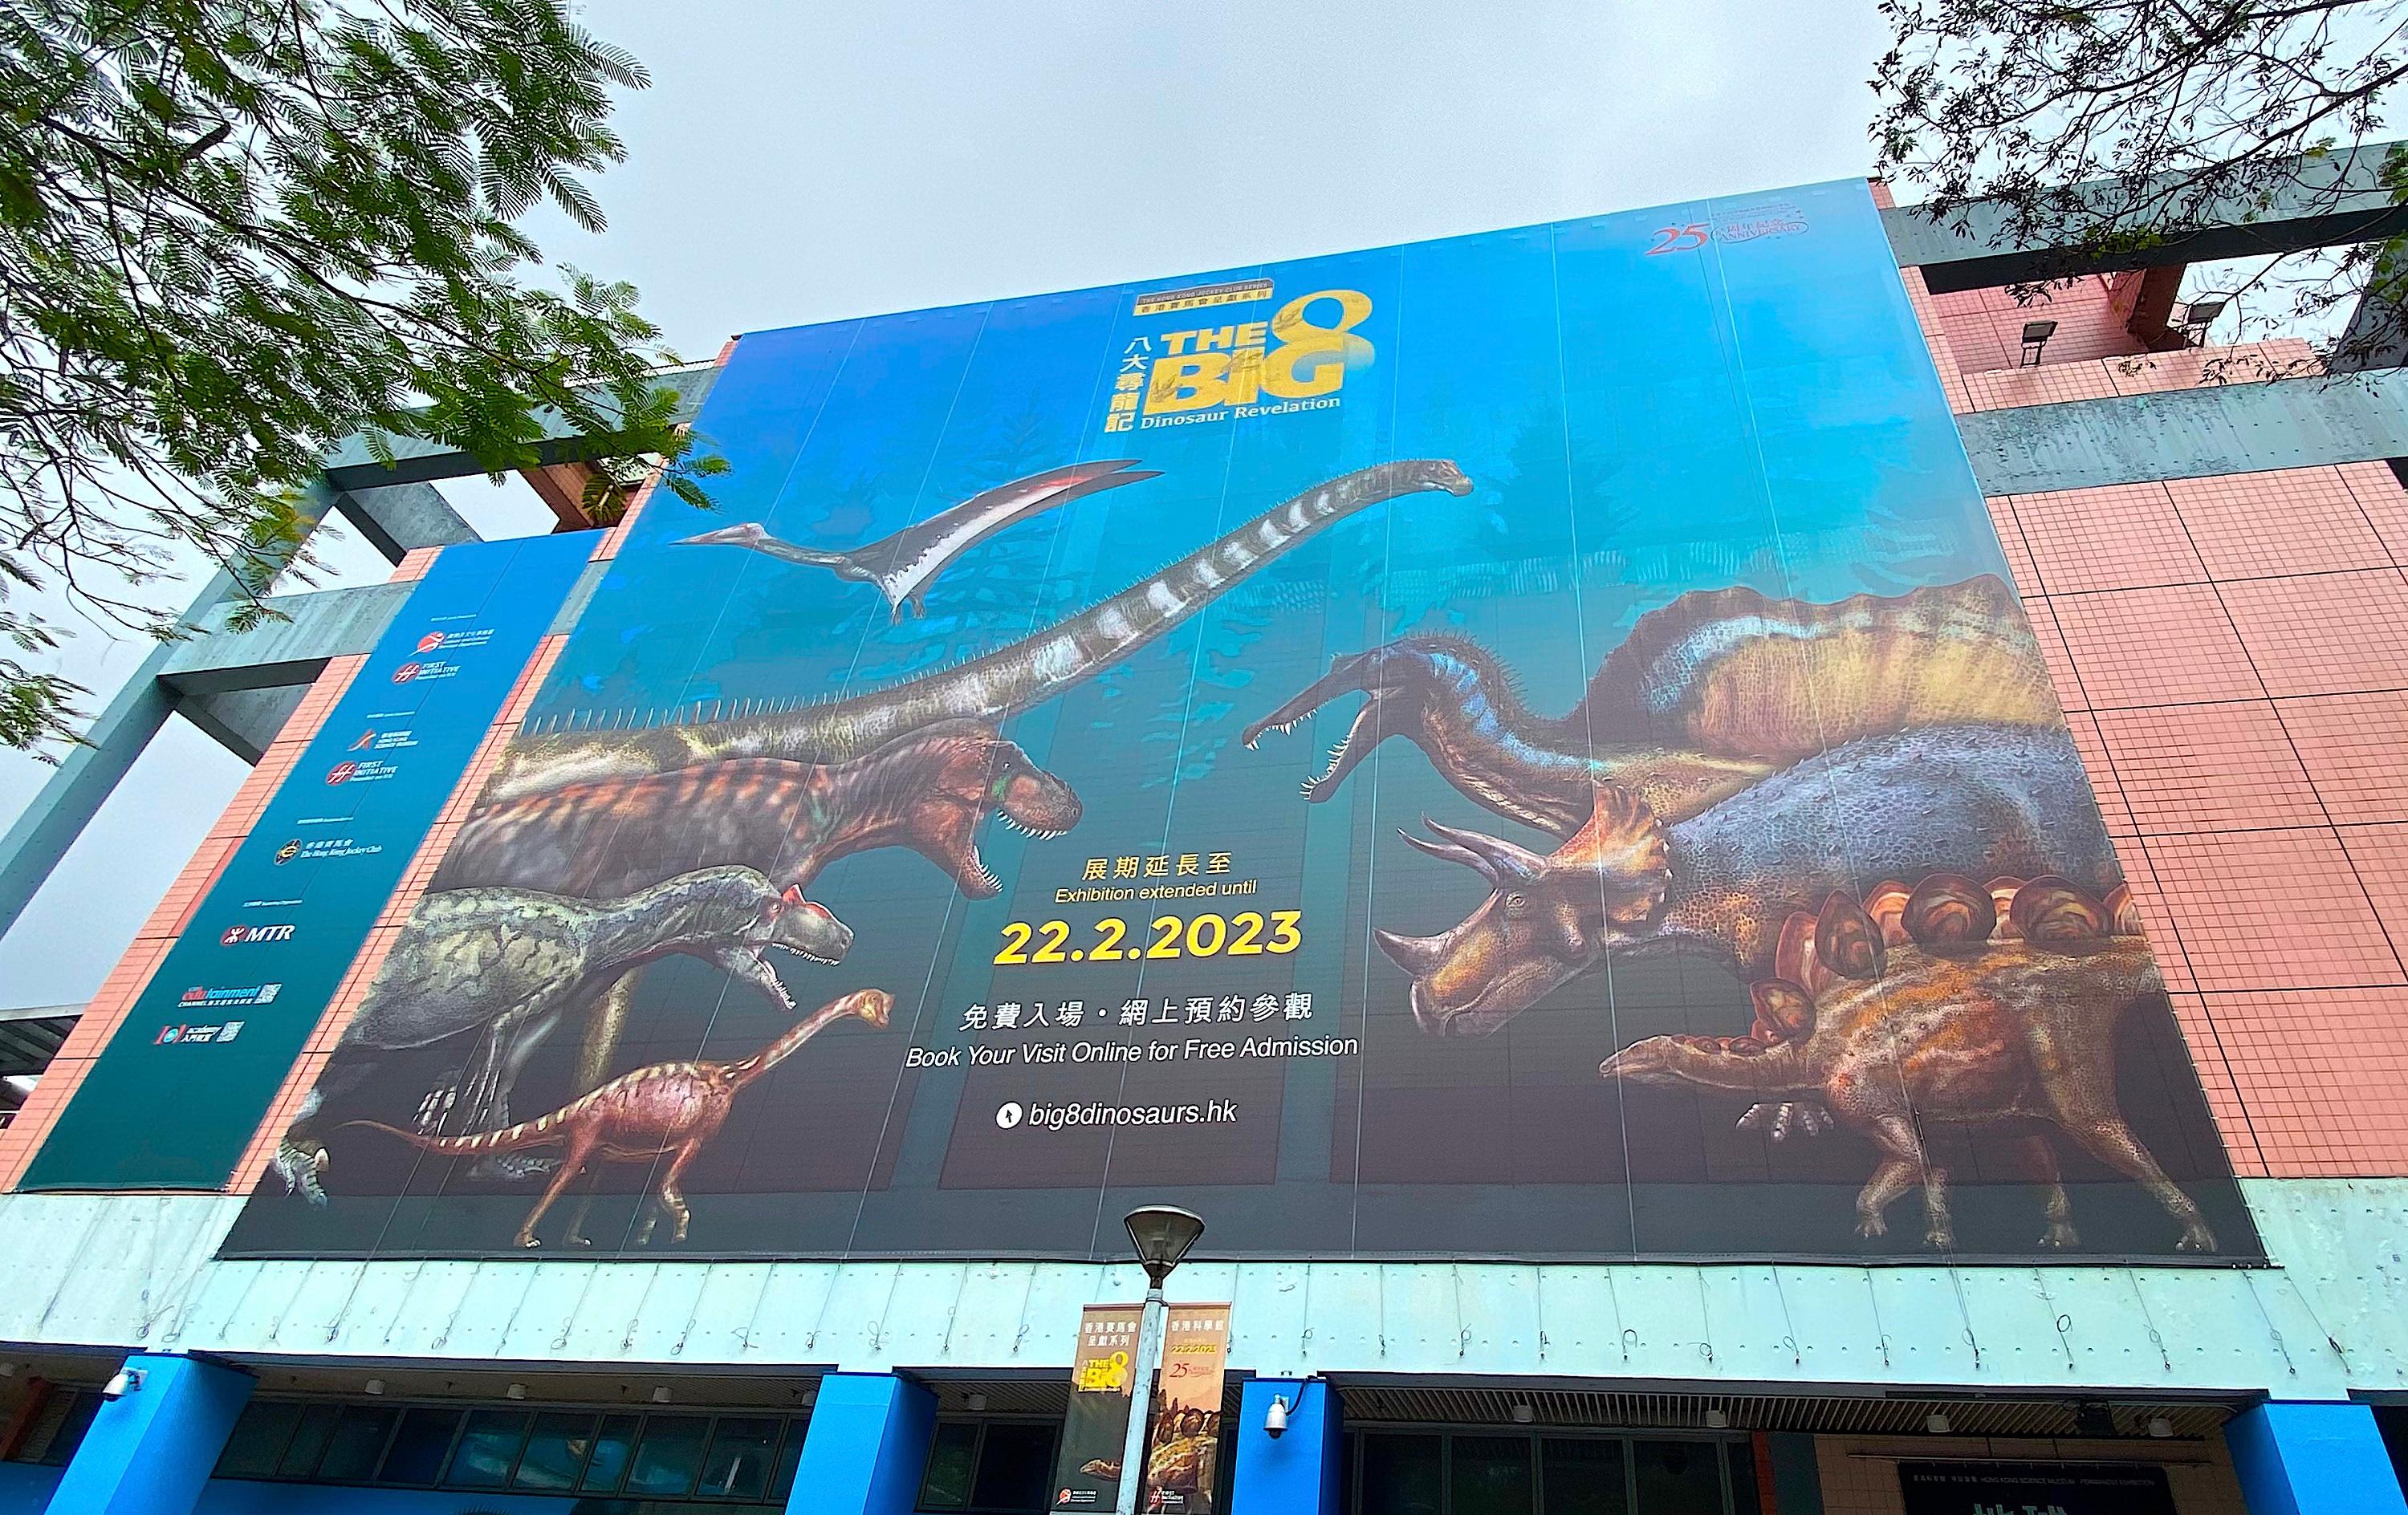 "The Hong Kong Jockey Club Series: The Big Eight - Dinosaur Revelation" exhibition being held at the Hong Kong Science Museum will end on February 22 (Wednesday). Members of the public should grasp the final opportunity to visit this not-to-be-missed exhibition.